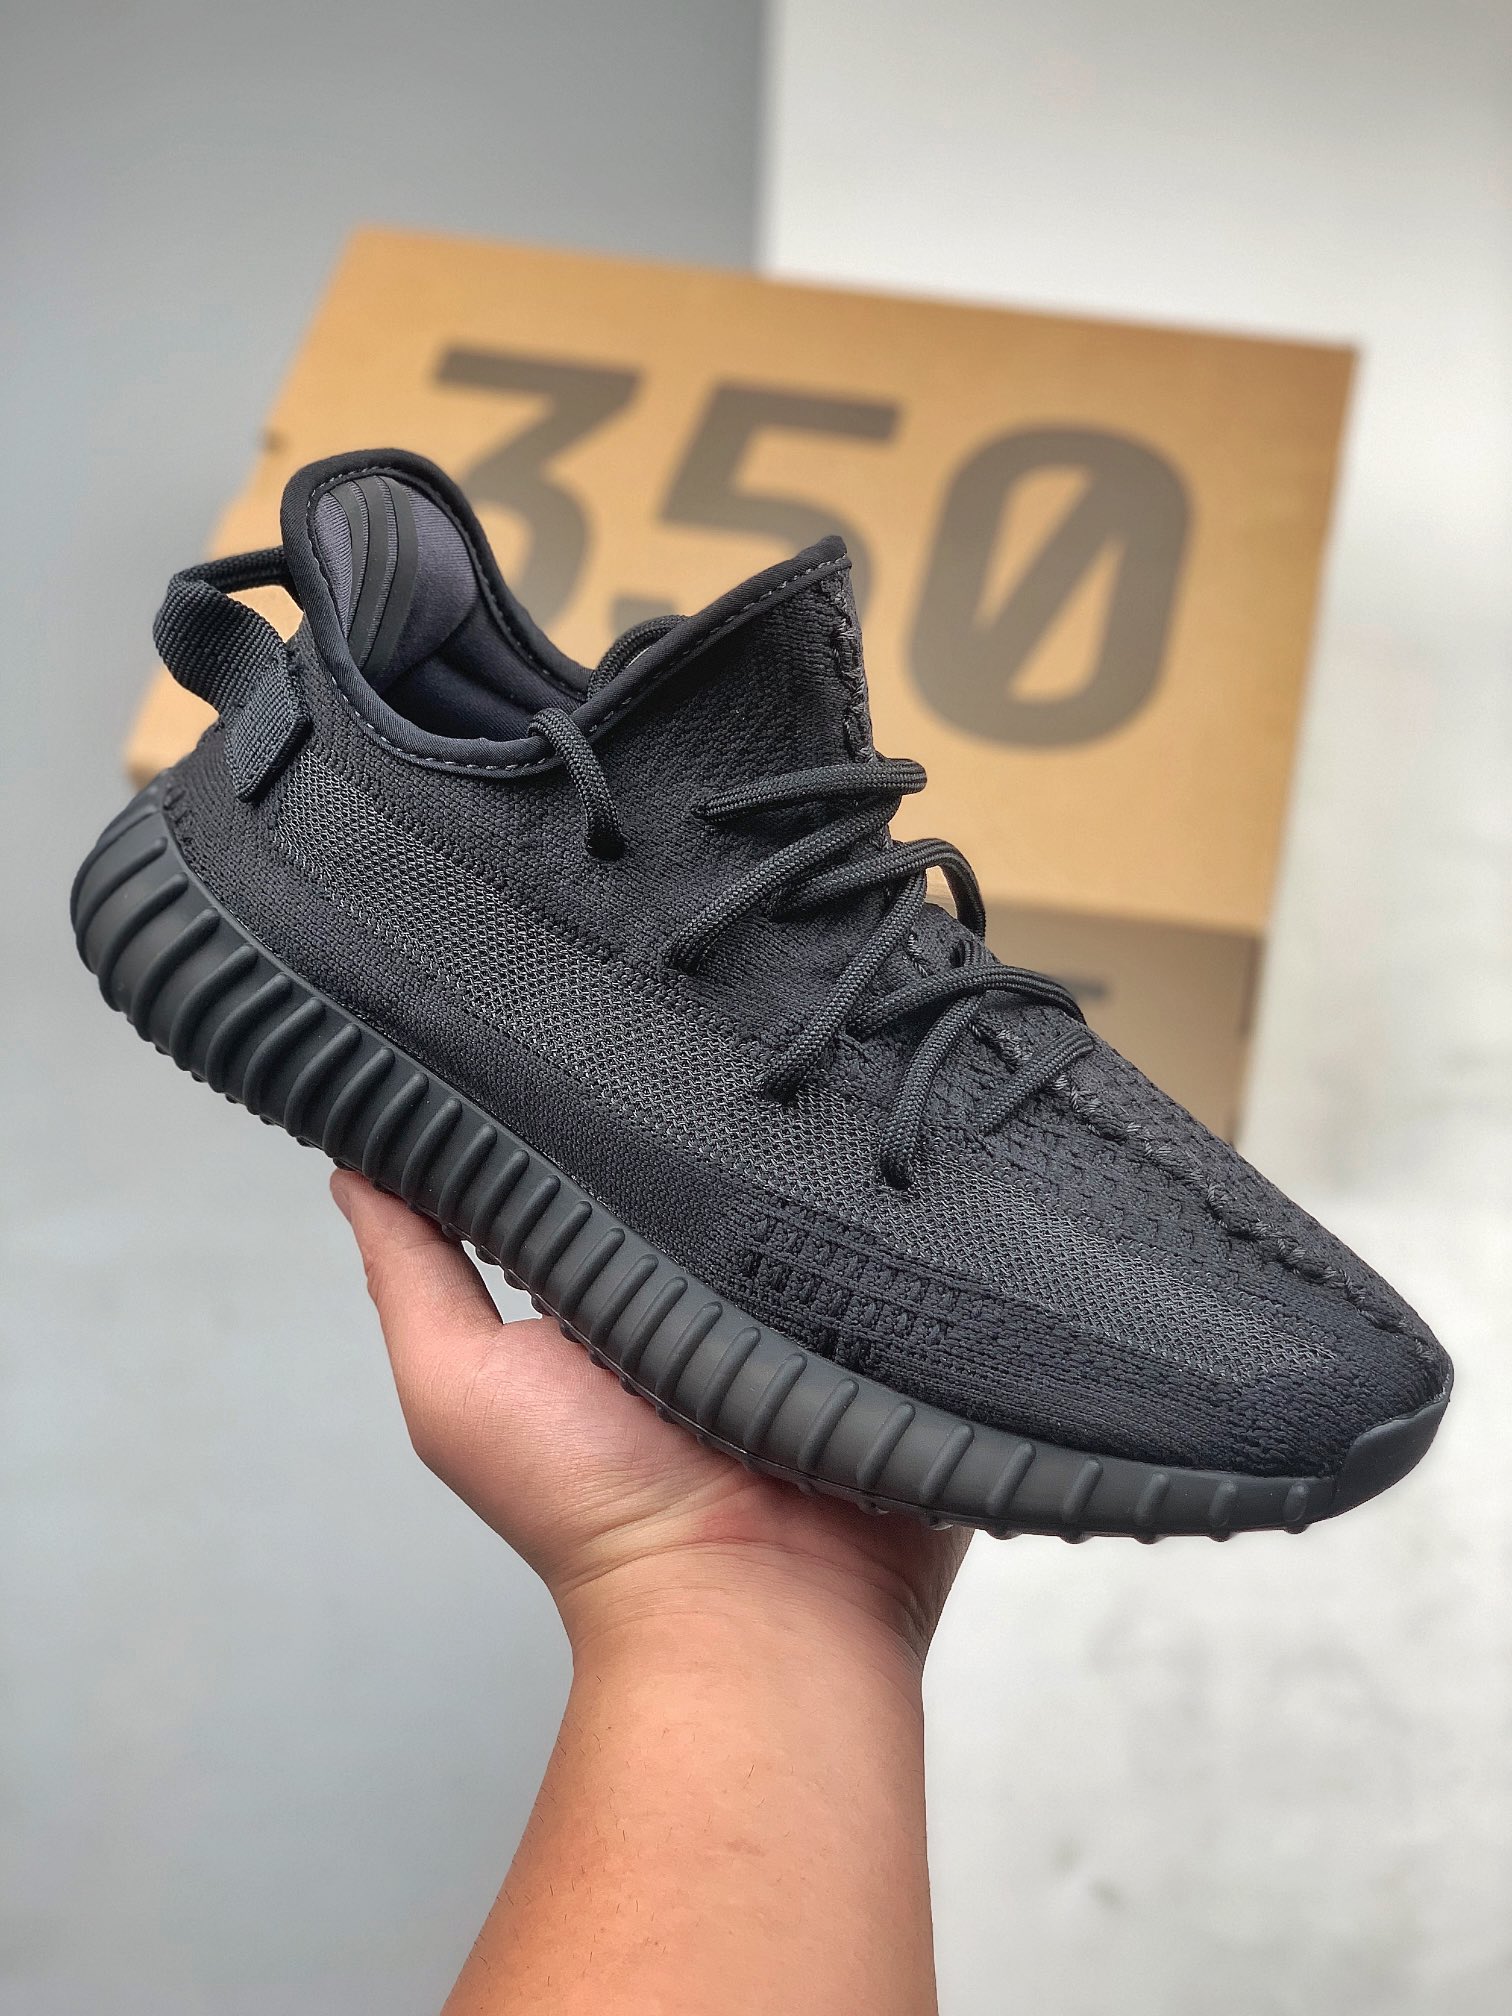 Adidas Yeezy Boost 350 V2 Cinder FY2903 - Shop the Latest Sneaker Releases